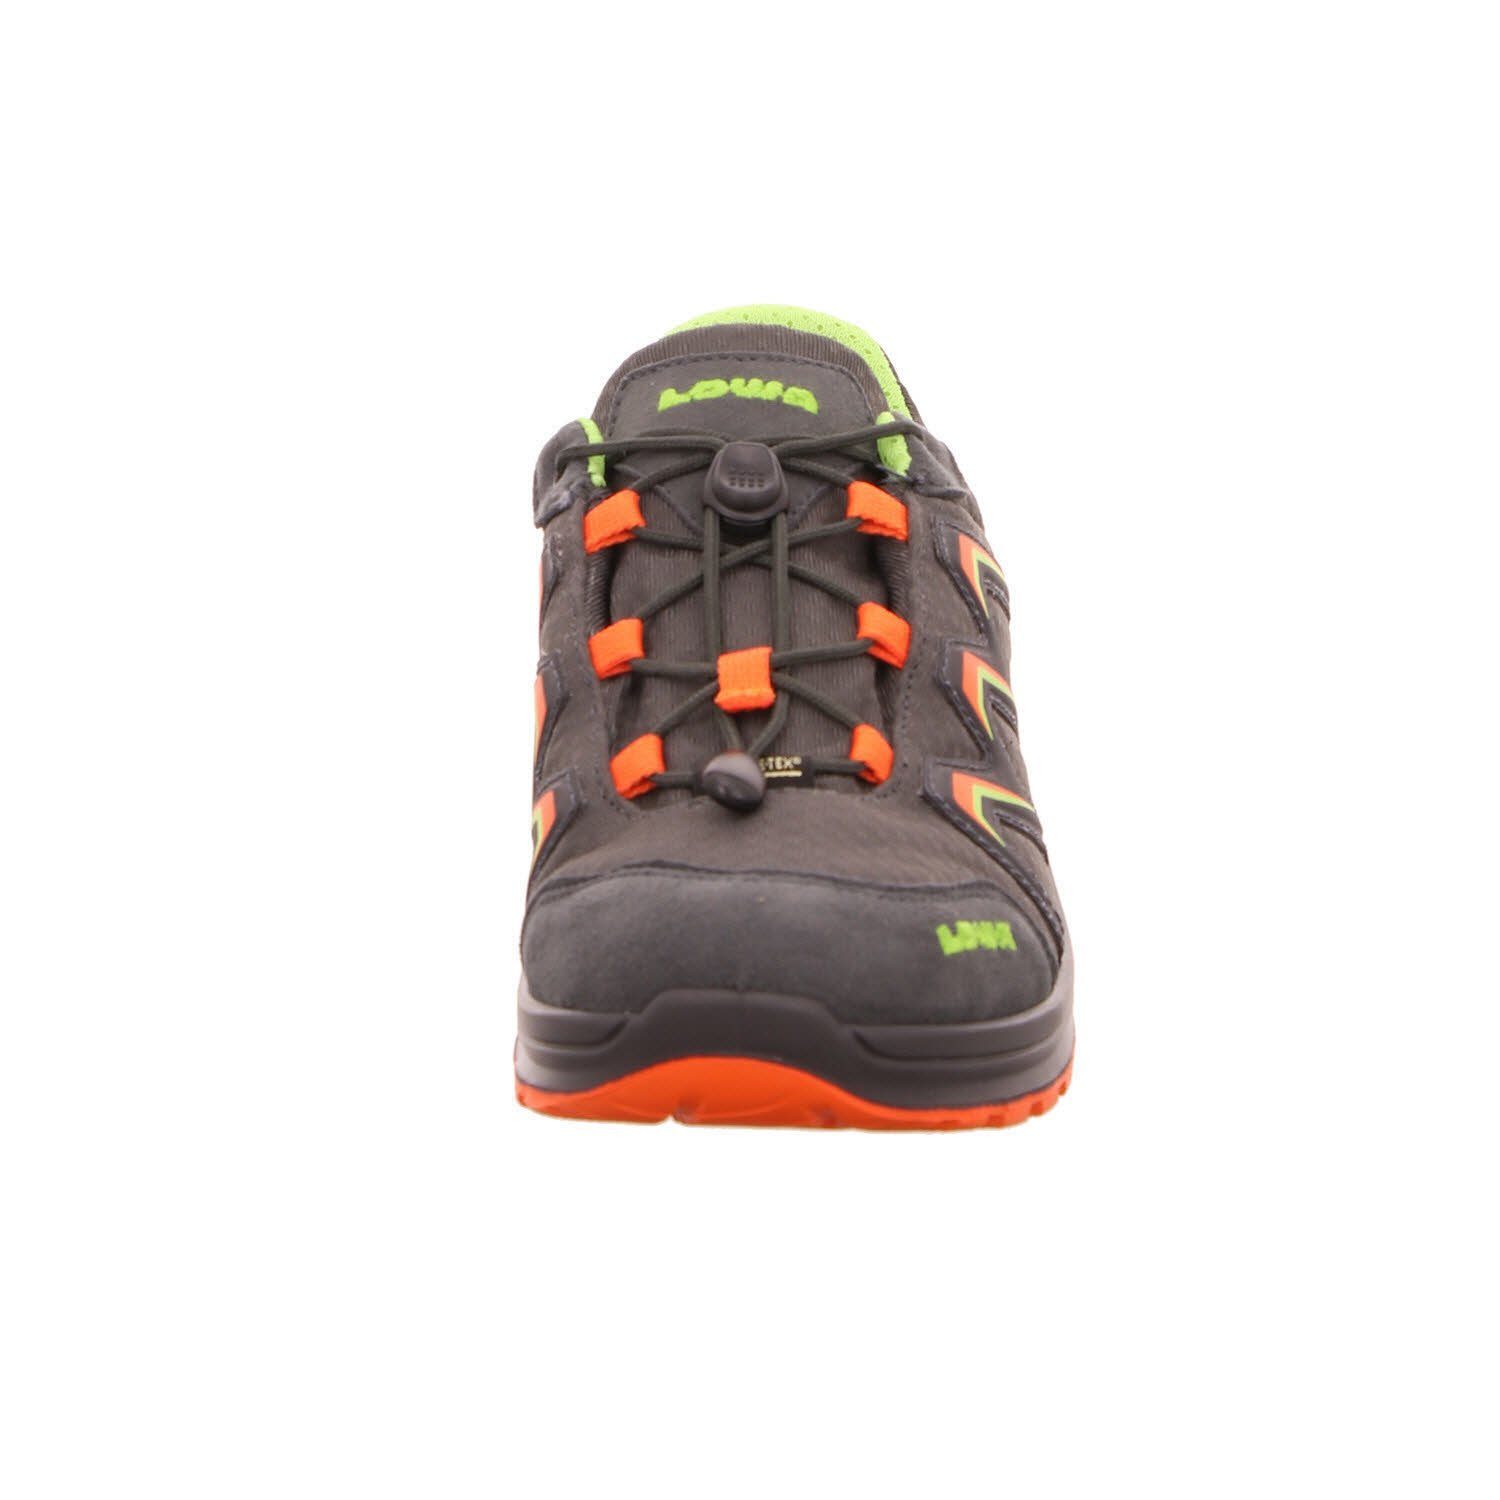 Lowa Outdoorschuh GRAPHIT/FLAME